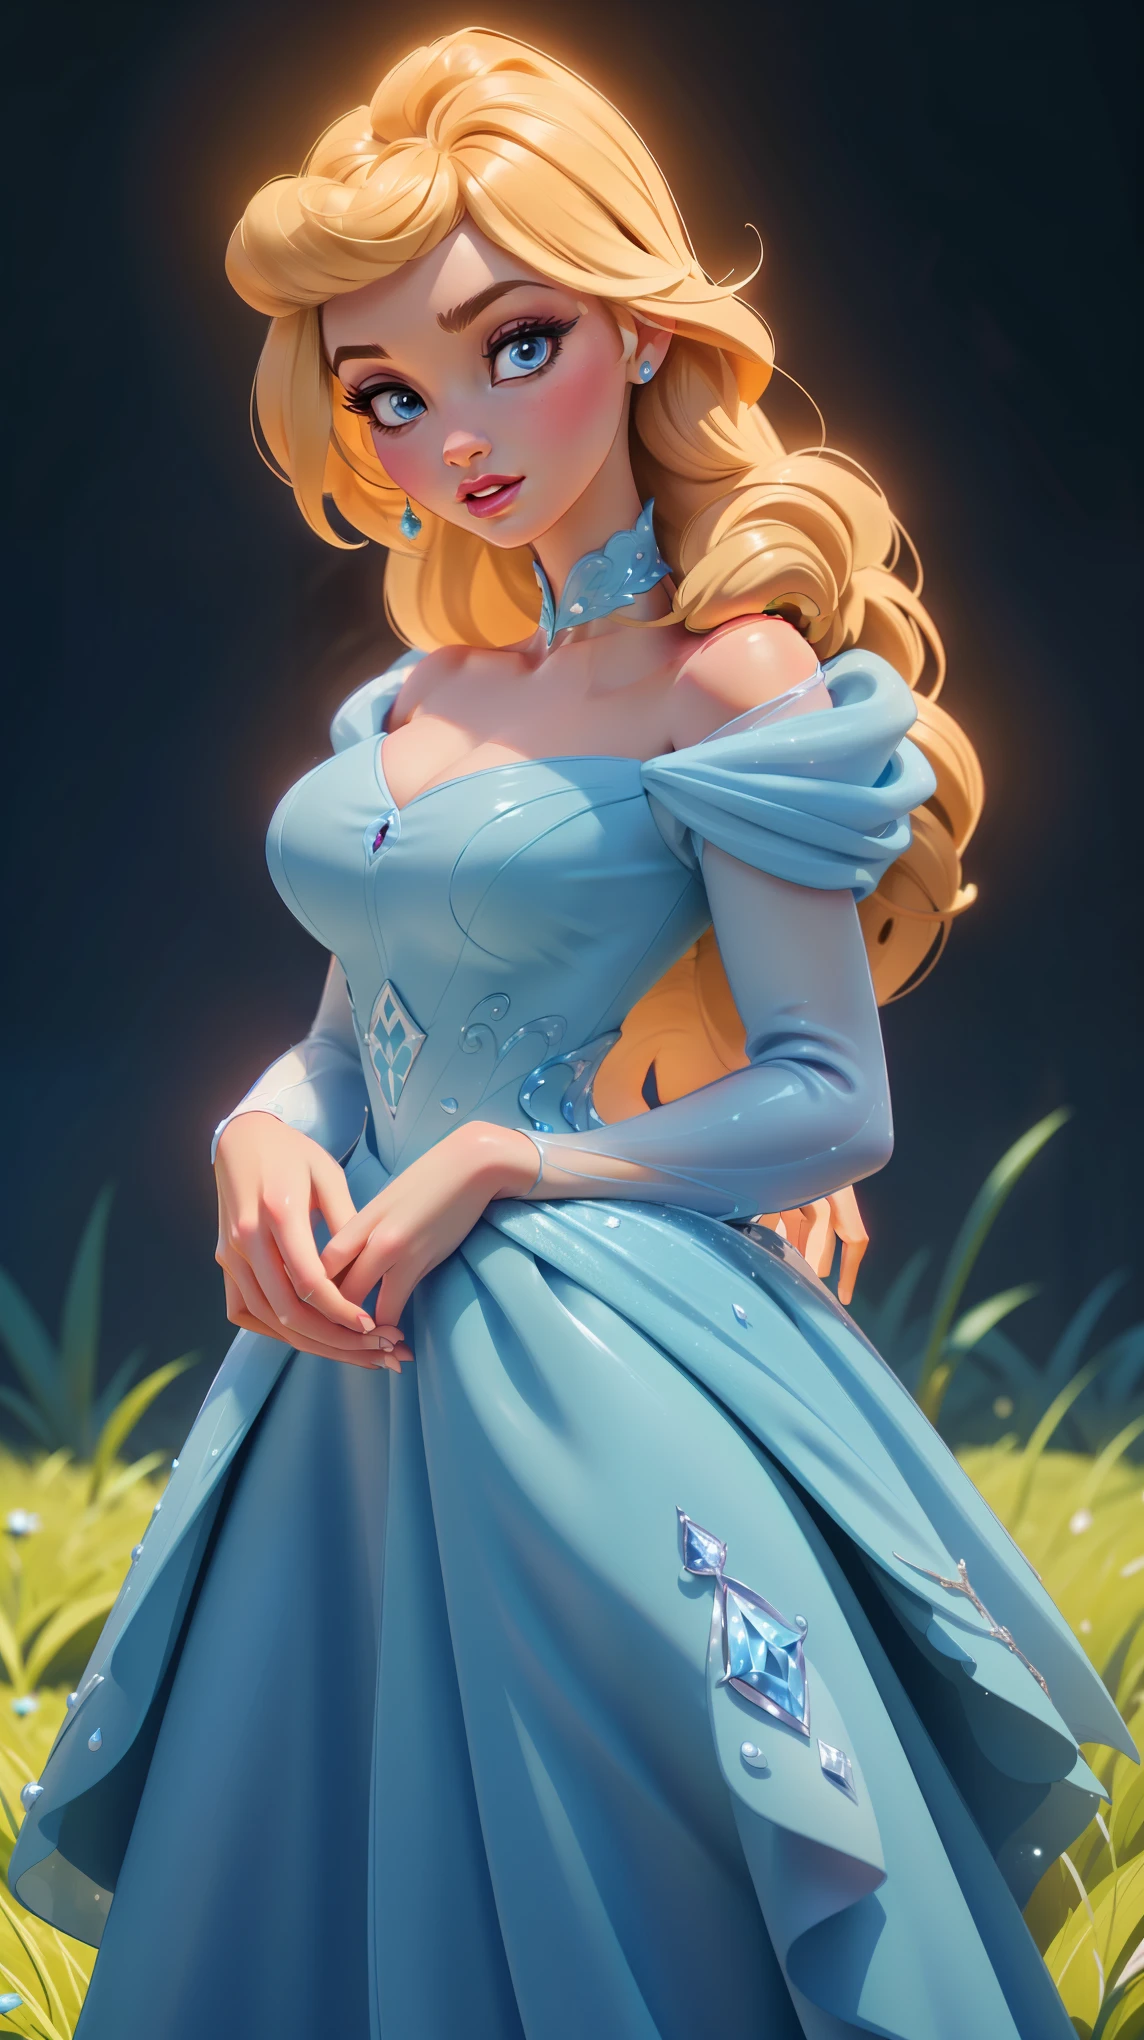 Elsa-Cinderella Fusion, Merging models, melting, Cinderella&#39;s clothes, 1girl, Beautiful, character, Woman, female, (master part:1.2), (best qualityer:1.2), (standing alone:1.2), ((struggling pose)), ((field of battle)), cinemactic, perfects eyes, perfect  skin, perfect lighting, sorrido, Lumiere, Farbe, texturized skin, detail, Beauthfull, wonder wonder wonder wonder wonder wonder wonder wonder wonder wonder wonder wonder wonder wonder wonder wonder wonder wonder wonder wonder wonder wonder wonder wonder wonder wonder wonder wonder wonder wonder wonder wonder, ultra detali, face perfect, seductive, flirting